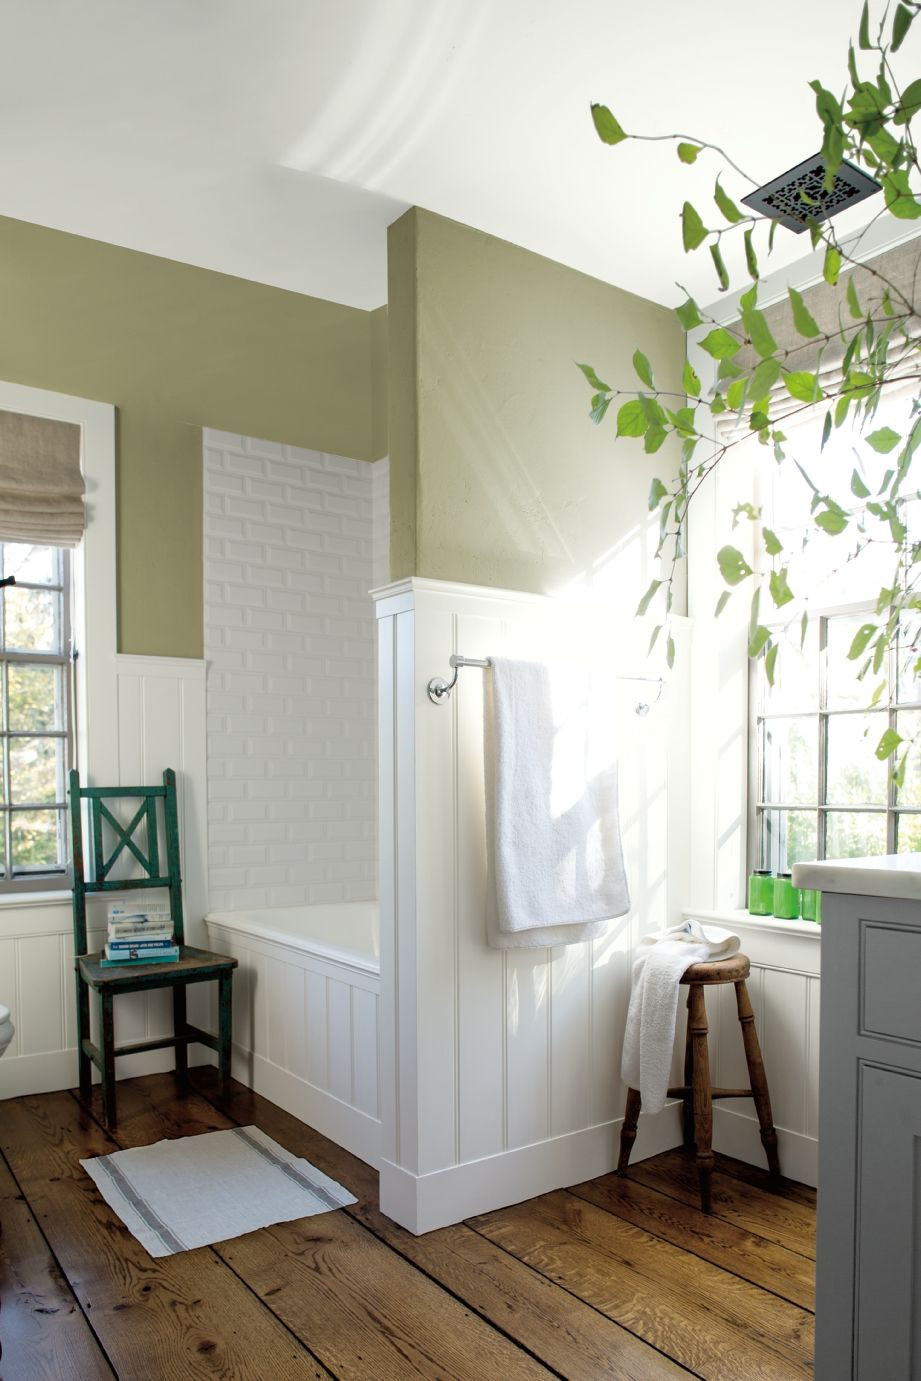 Master Bathroom Paint Colors
 About the Williamsburg Paint Color Collection in 2020